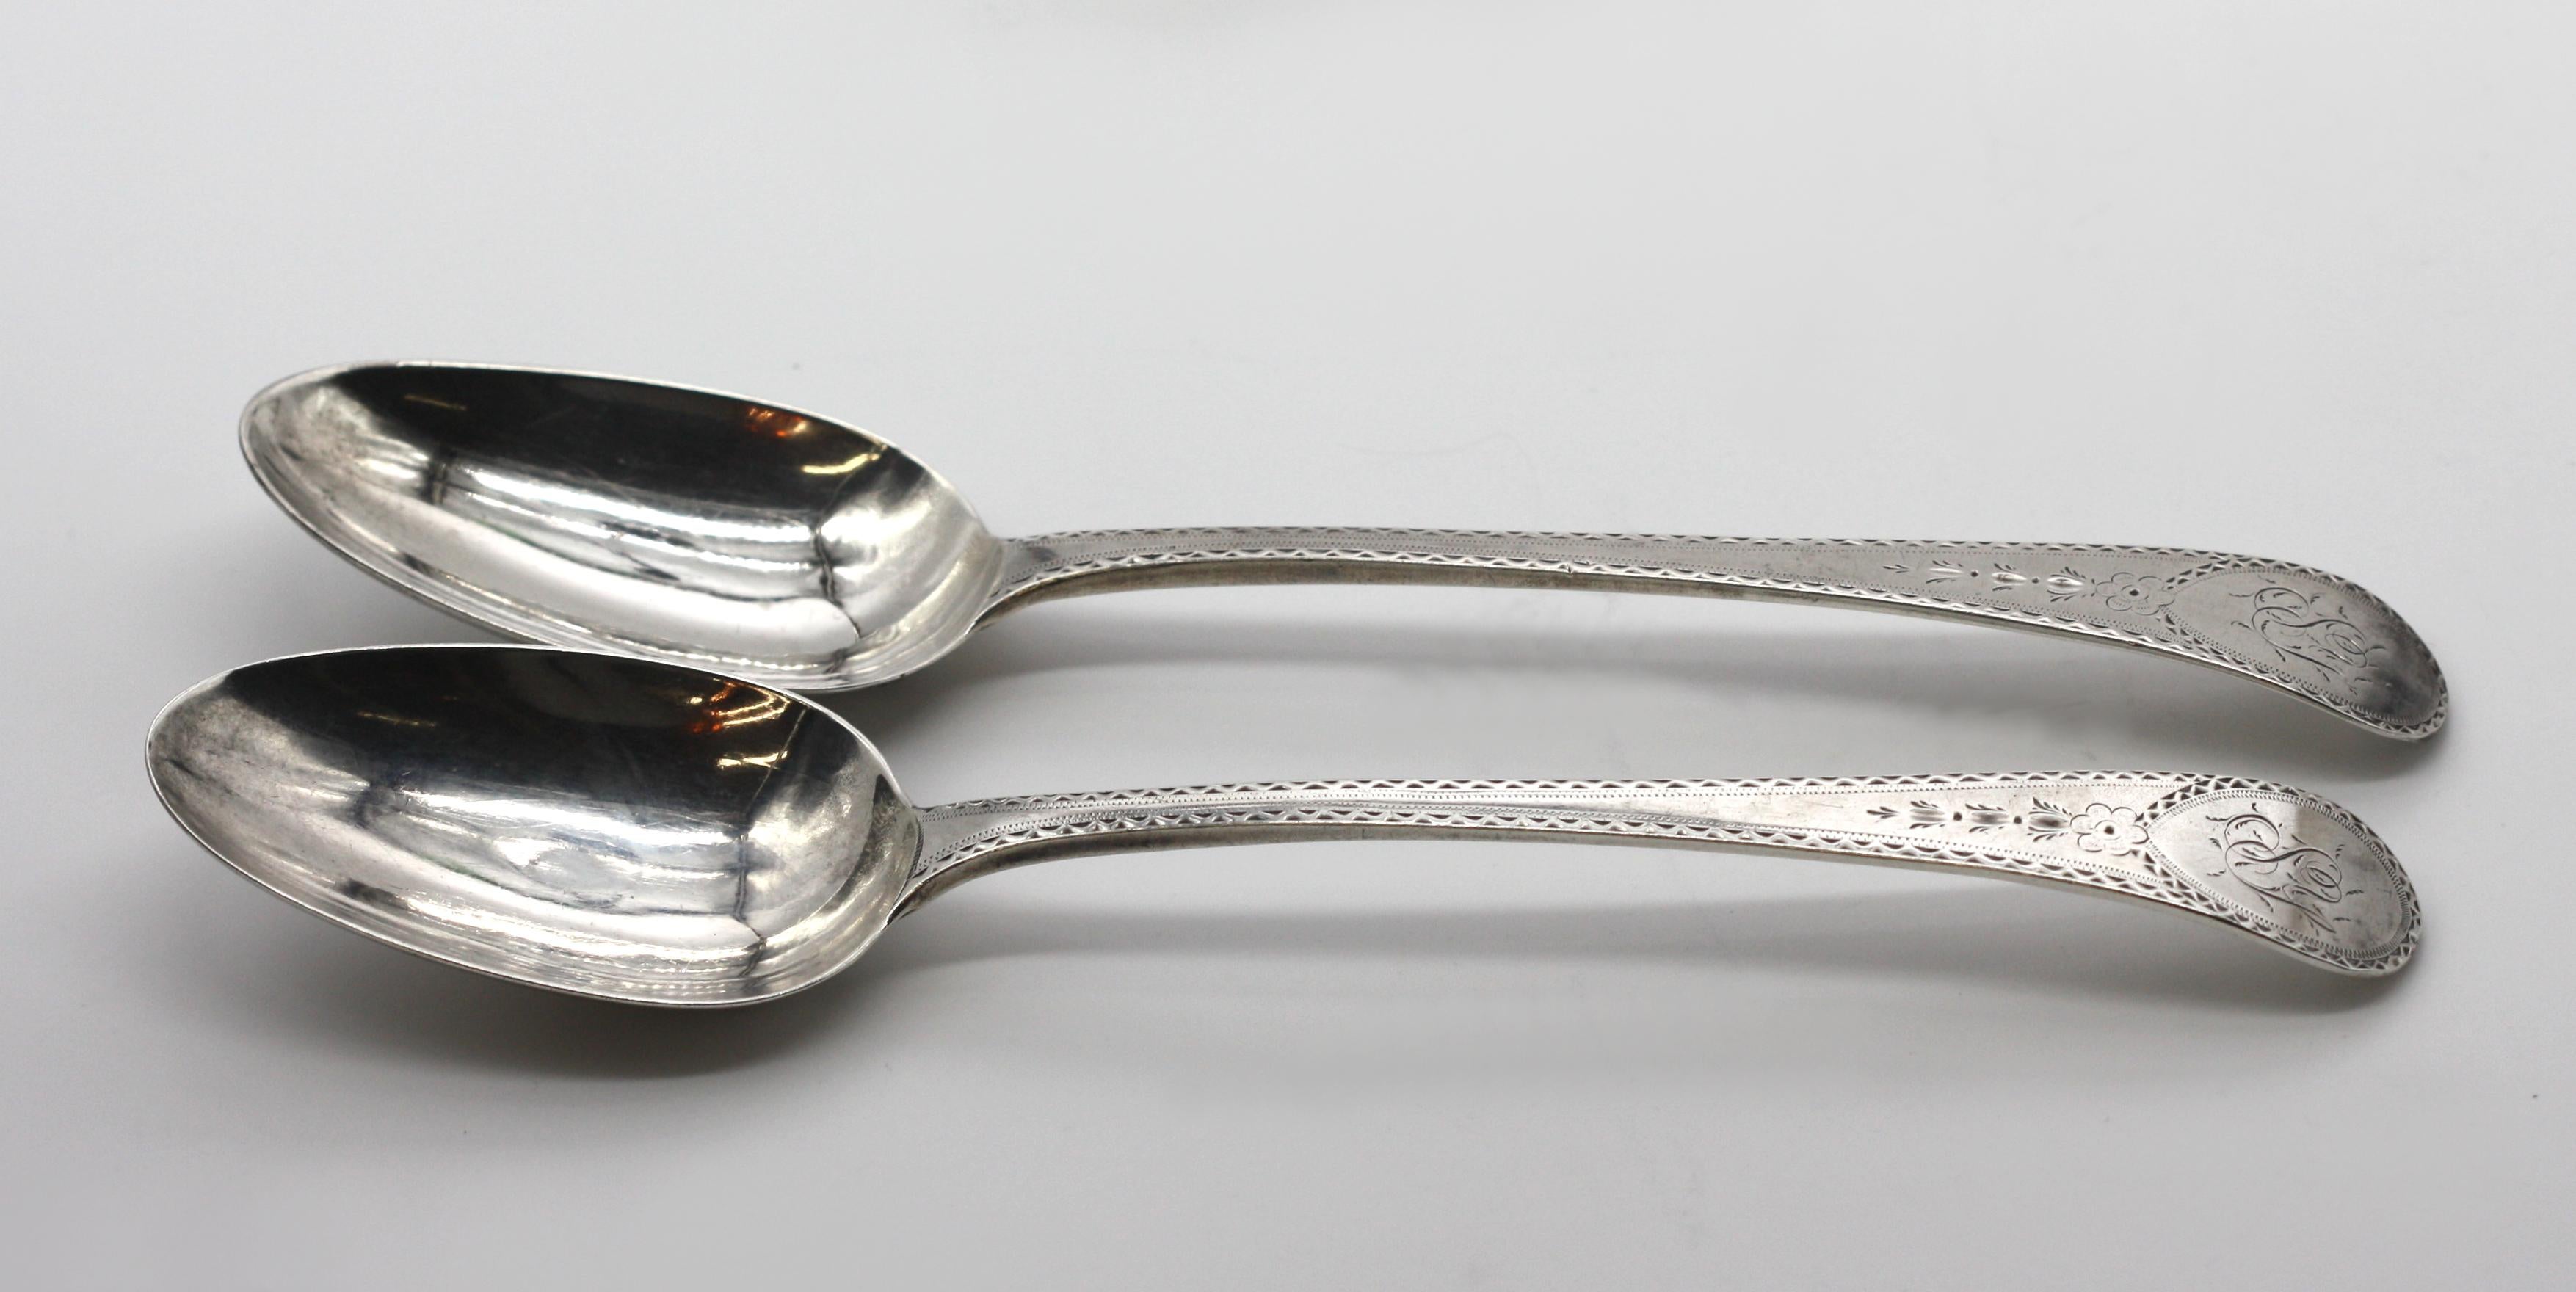 
Two Pairs of English Silver Serving Spoons.
Late 18th Century, marked, maker probably, Samuel Wintle. The first pair with one spoon cast with short prongs, with the handle incised with a bull-headed device, the second pair, monogramed, and with